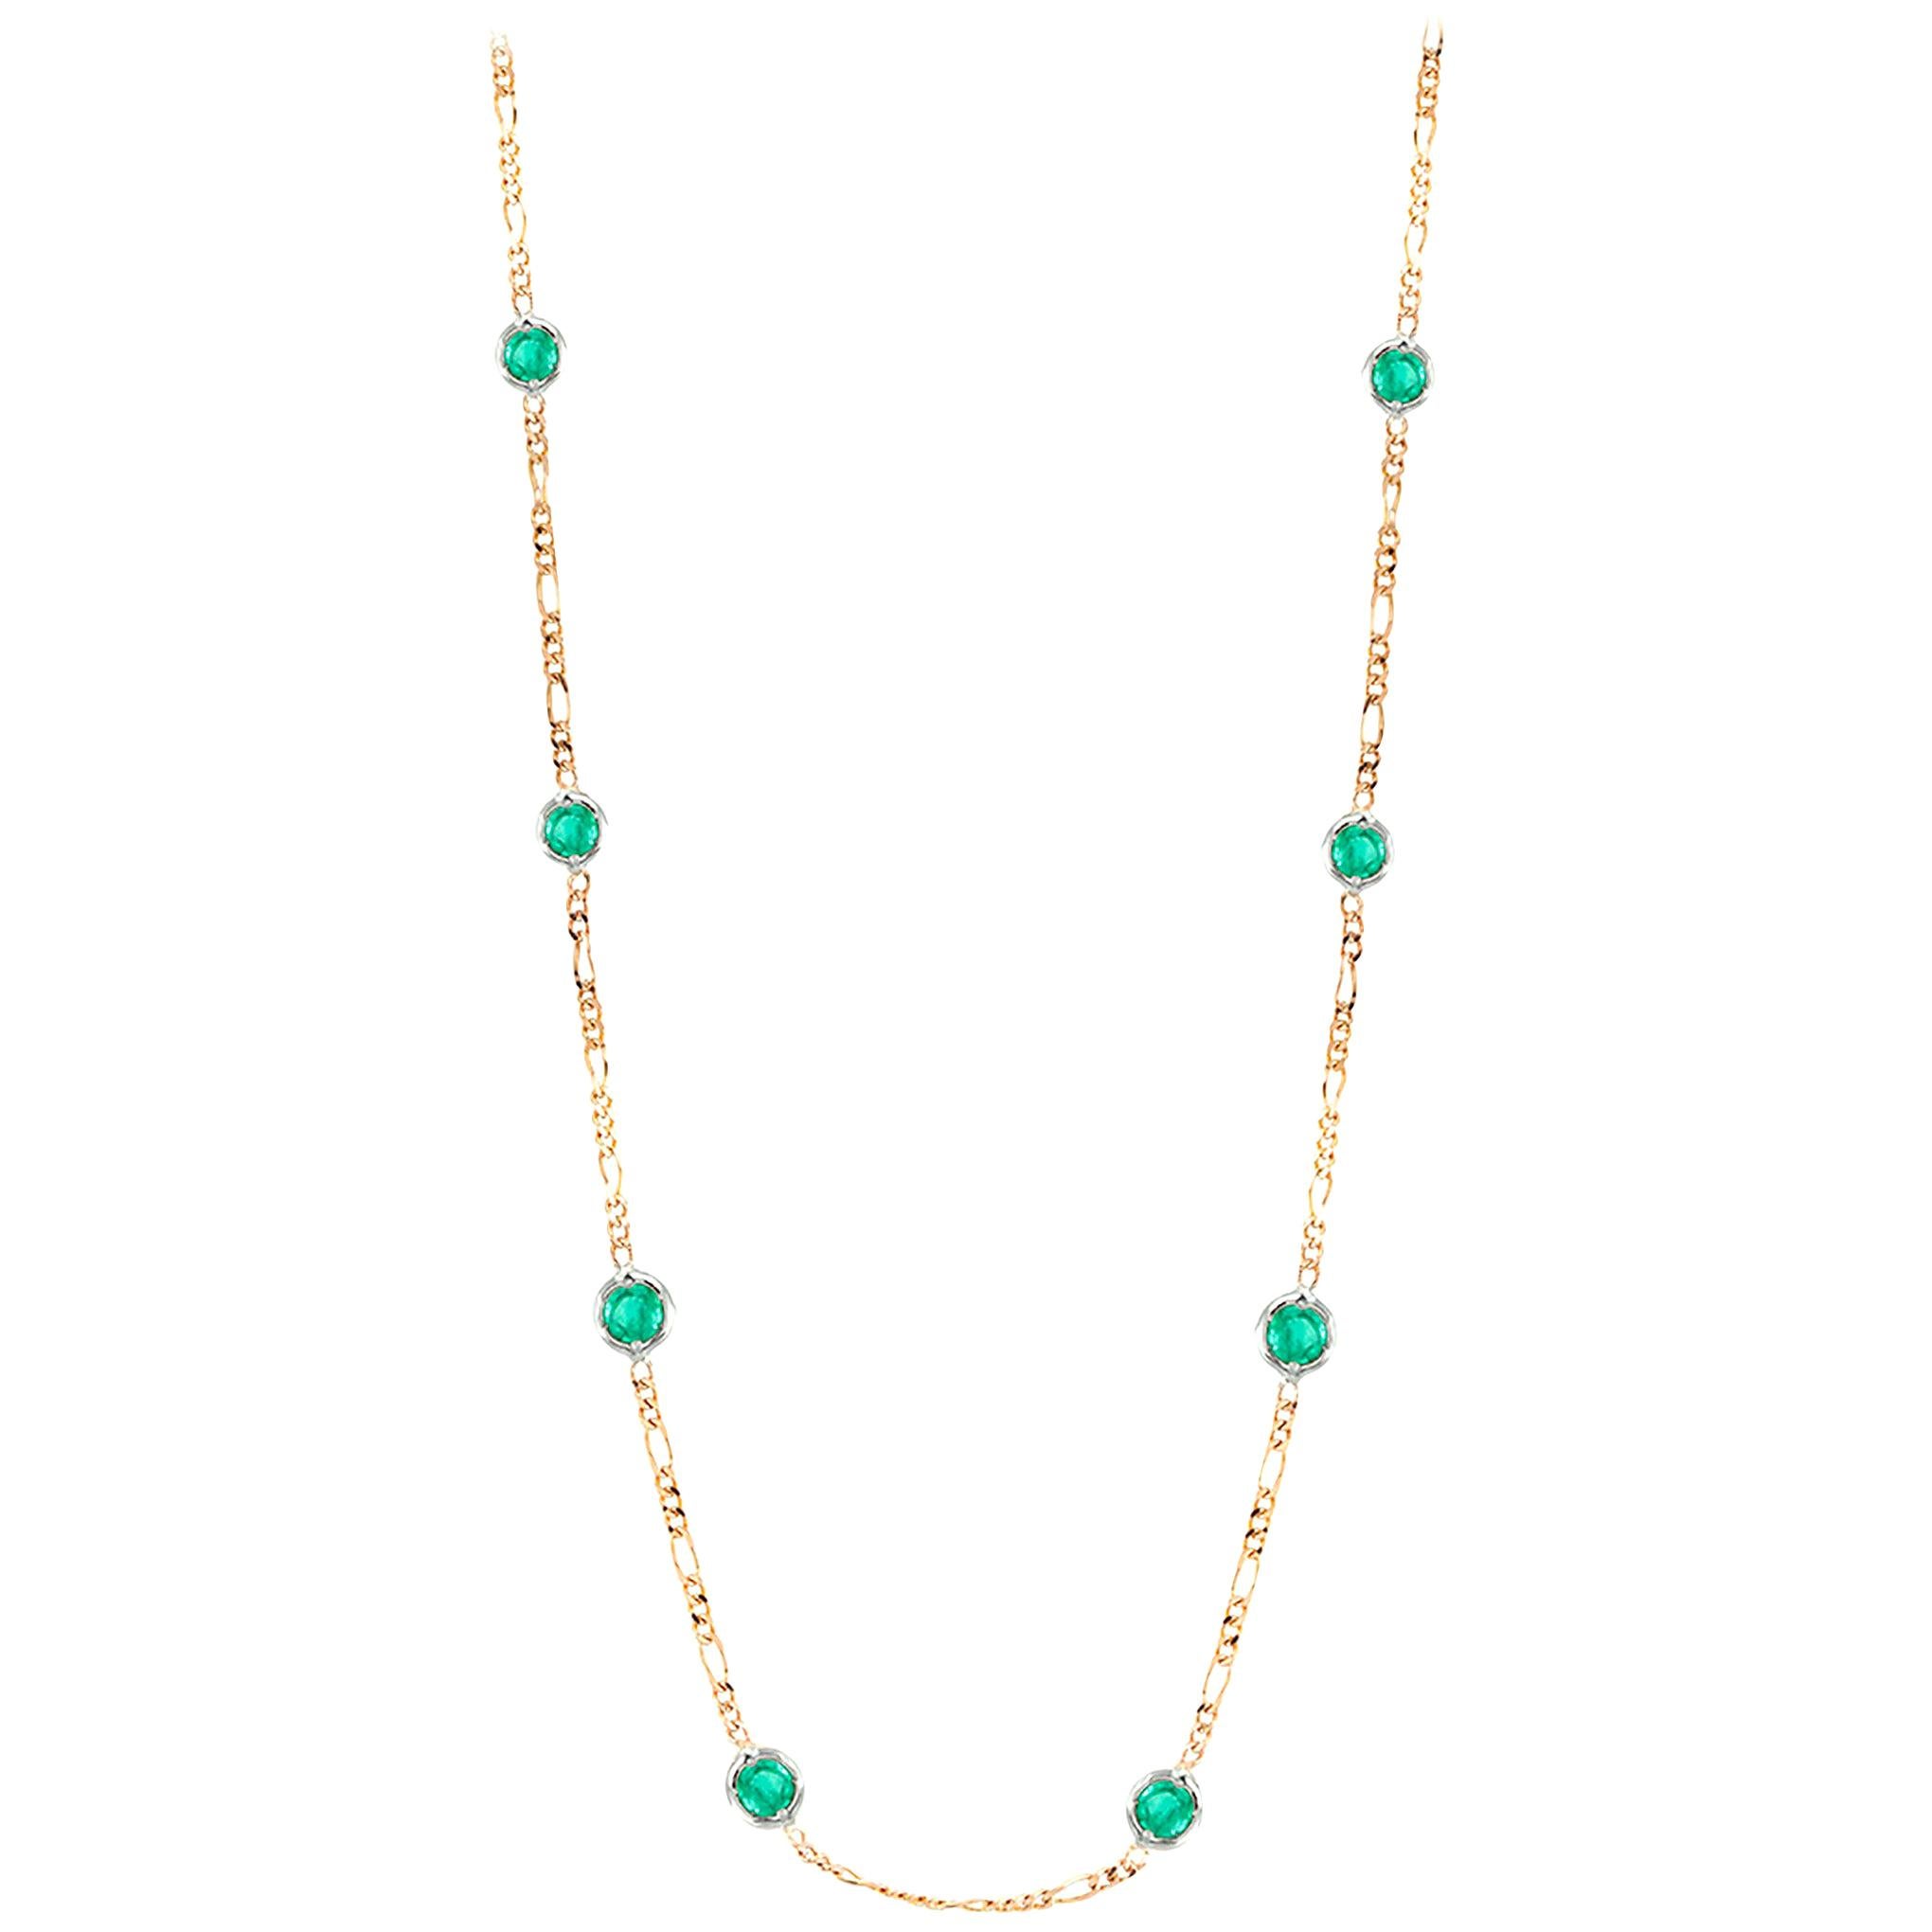 14 karat yellow gold necklace pendant 
Measuring 18 inch long
Seven bezel-set round emeralds weight 1.15 carats 
Width of emeralds measuring 3 millimeter 
Chain necklace with spring lock: a lock that fastens with a spring bolt
New Necklace
Our team